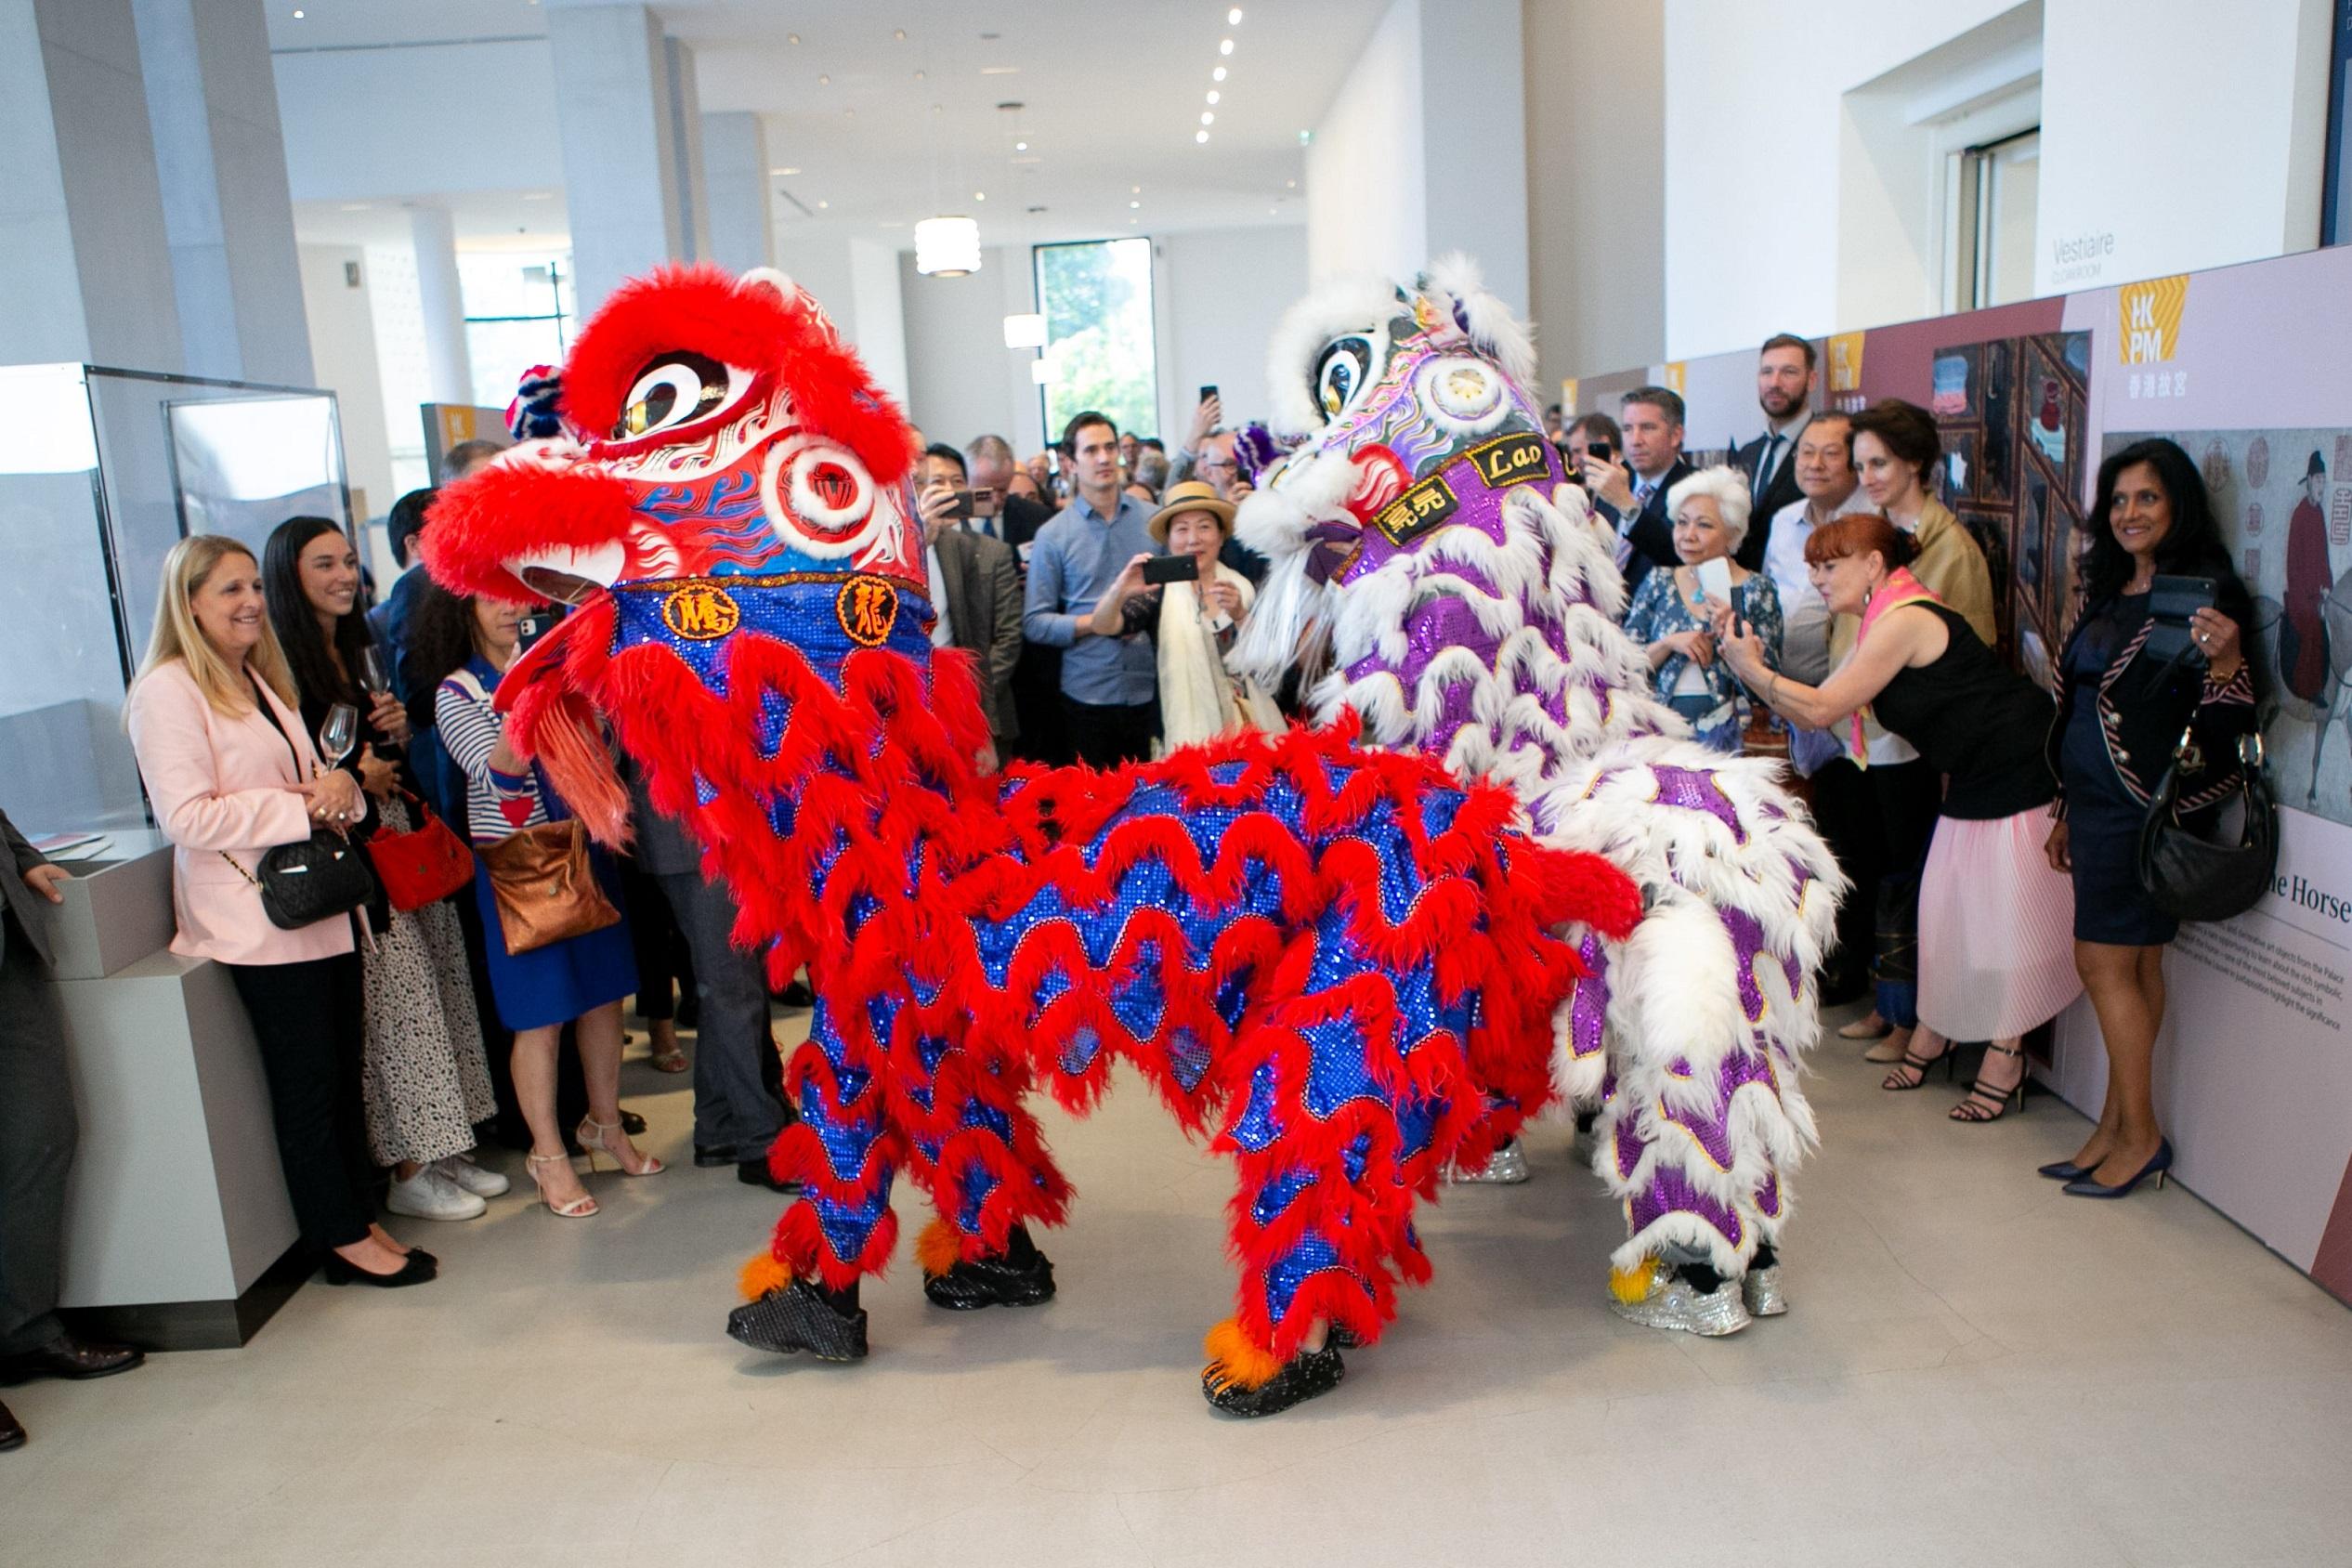 Guests at a gala event in Paris, France, on June 27 (Paris time) to celebrate the 25th anniversary of the establishment of the Hong Kong Special Administrative Region are entertained with a lion dance.